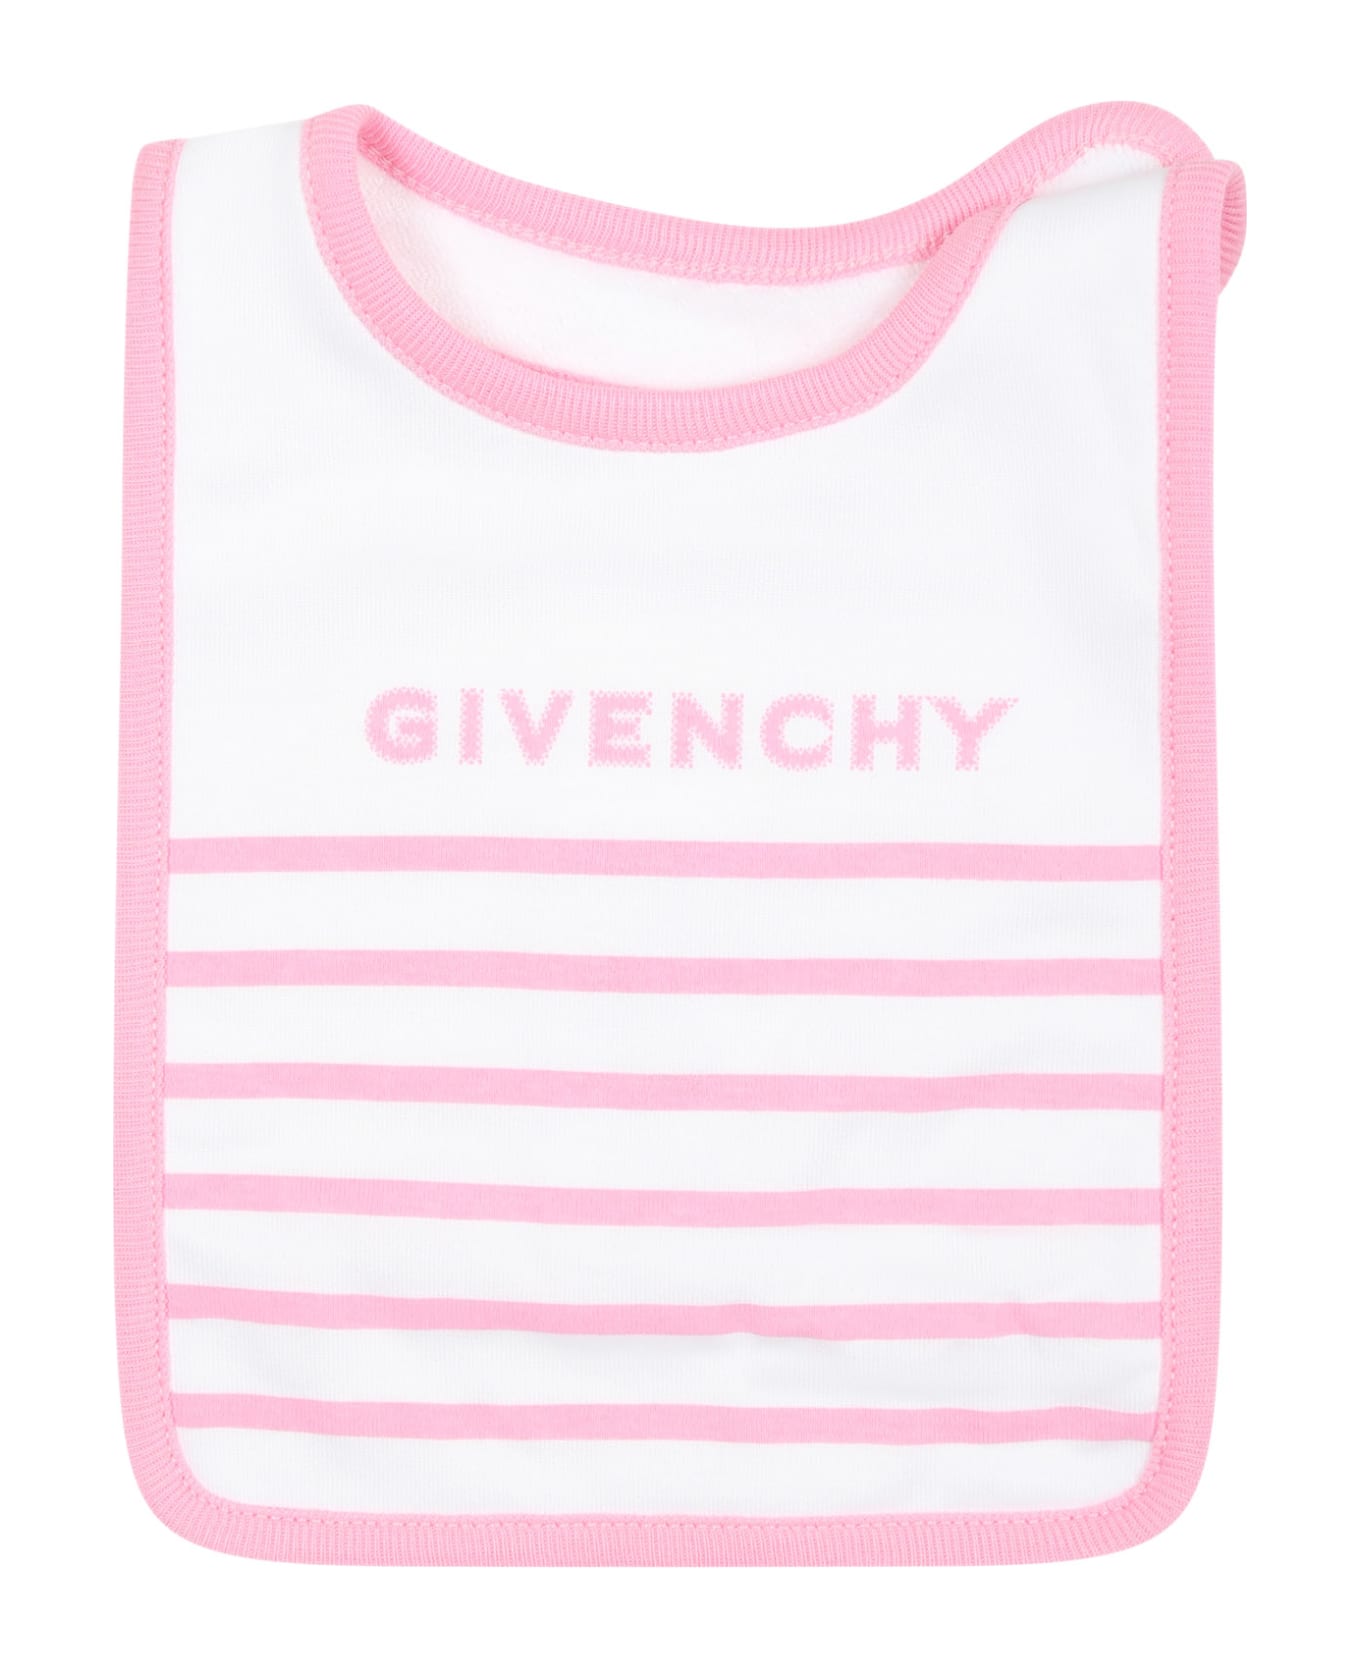 Givenchy Pink Set For Baby Girl With Logo Stripes - Pink